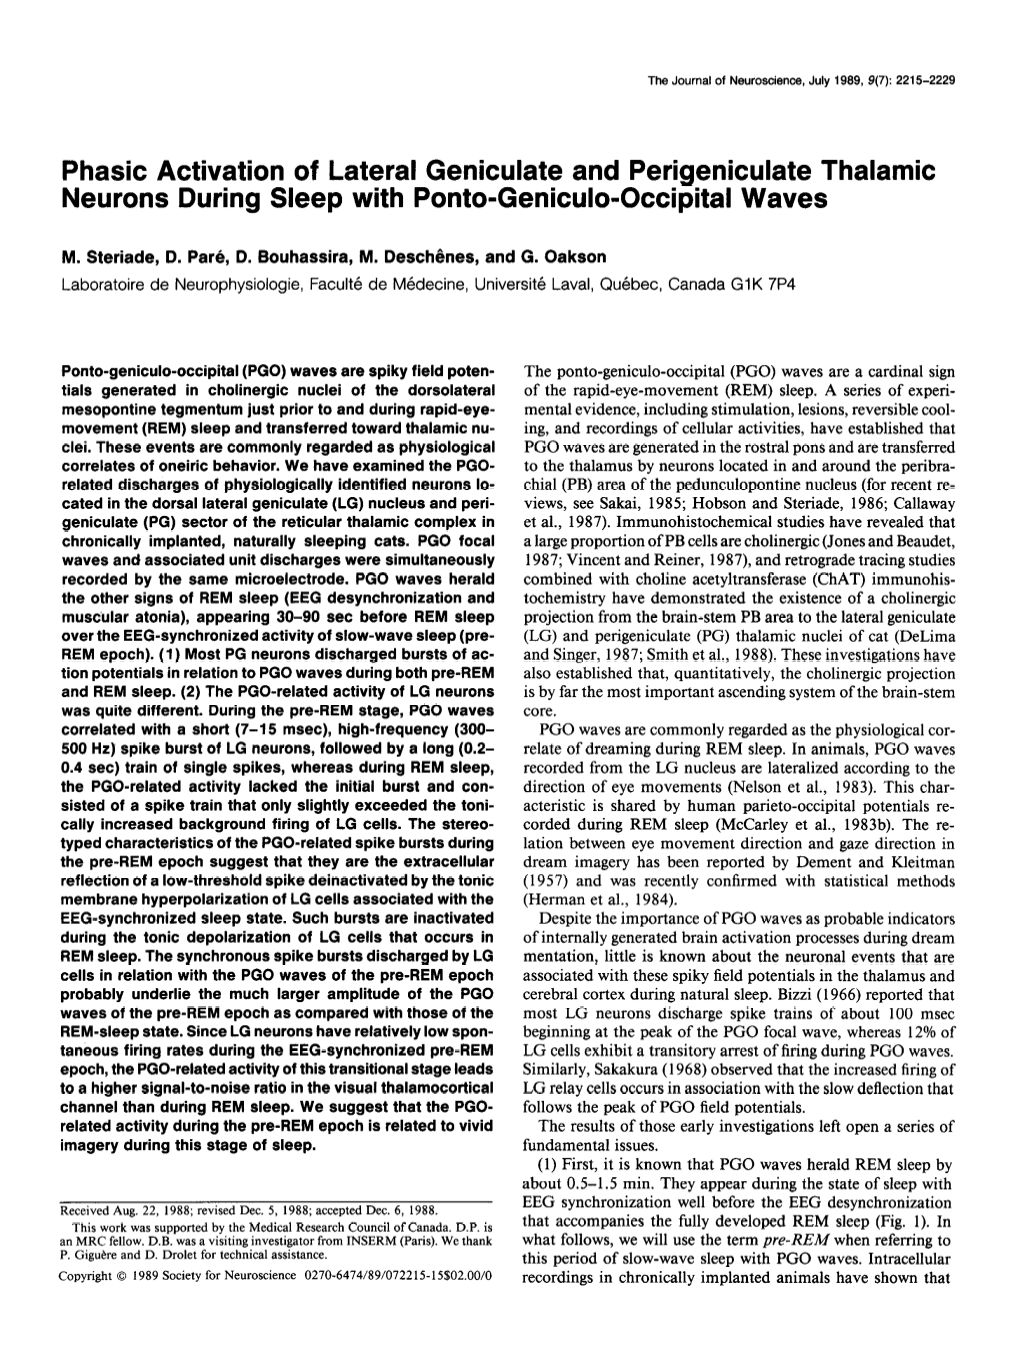 Phasic Activation of Lateral Geniculate and Perigeniculate Thalamic Neurons During Sleep with Ponto-Geniculo-Occipital Waves